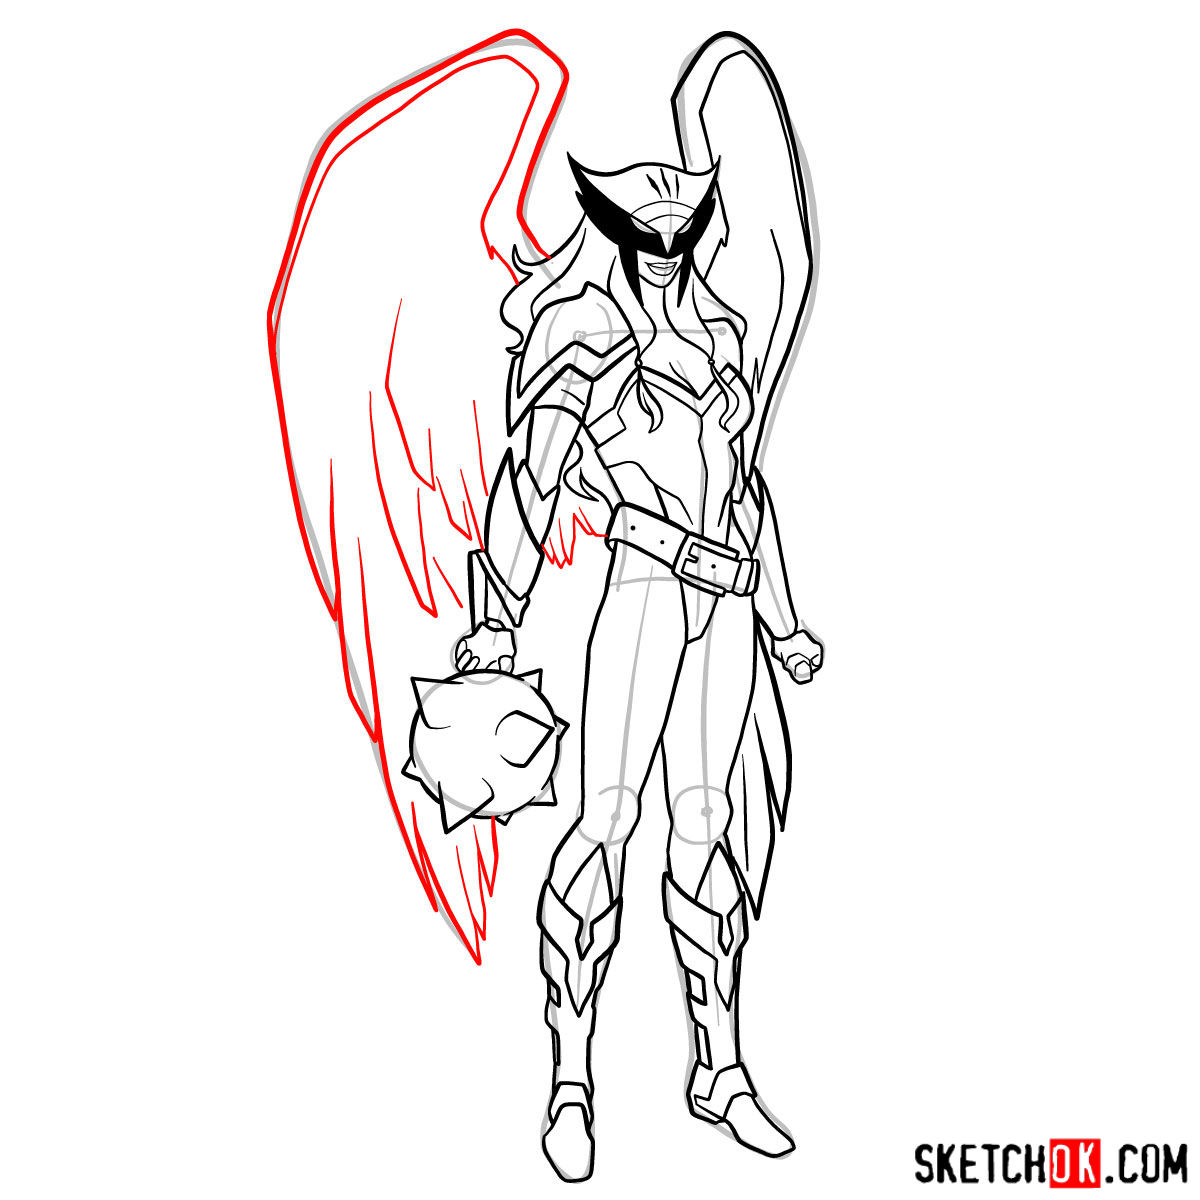 How to draw Hawkgirl DC superheroine - step 17